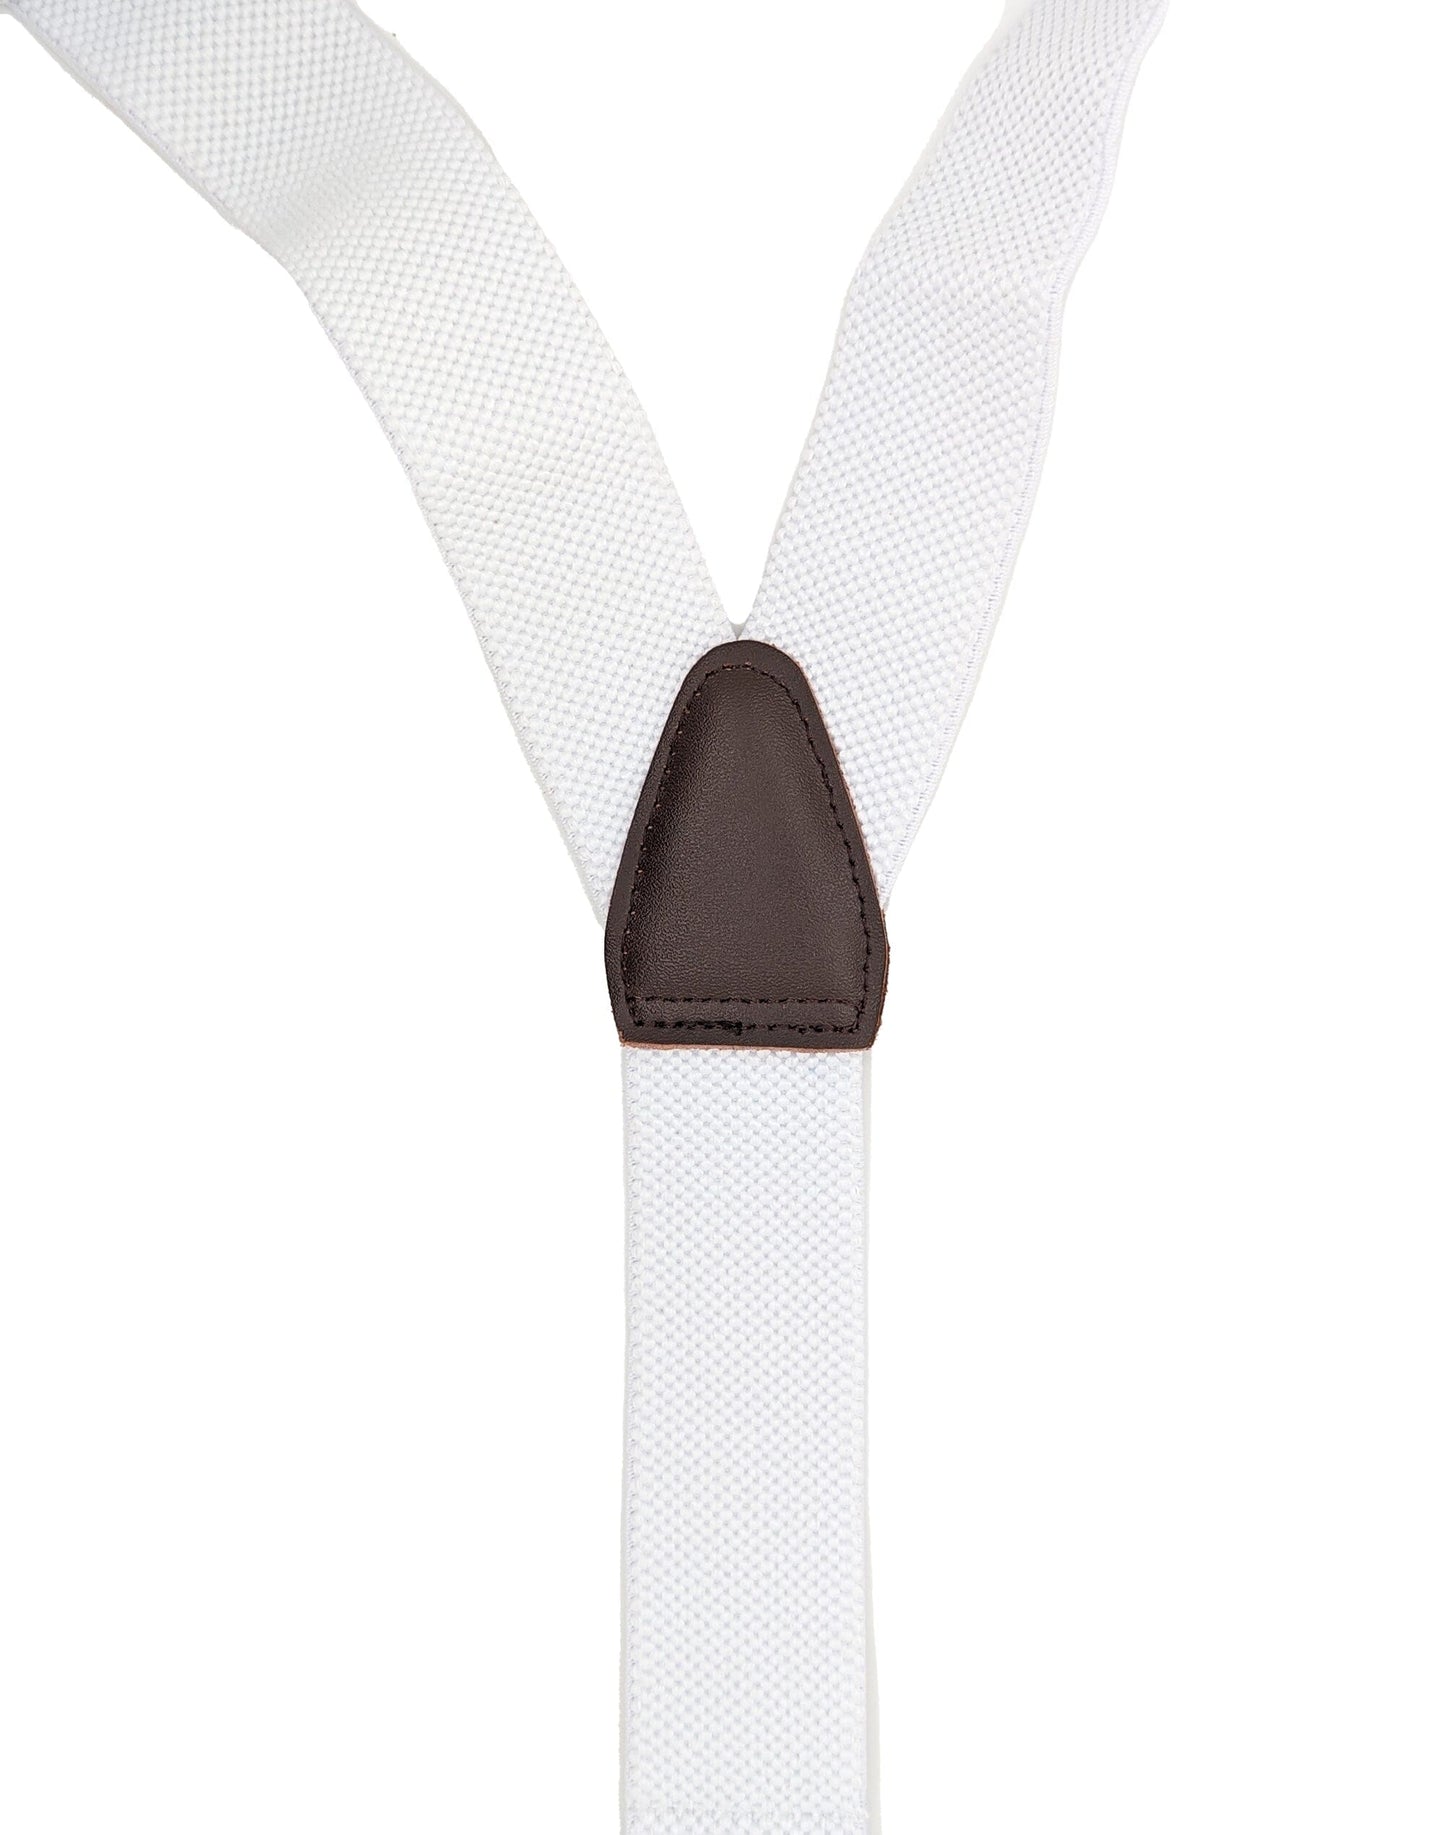 White Leather-Ended Extra Long Braces - Braces - - THREADPEPPER